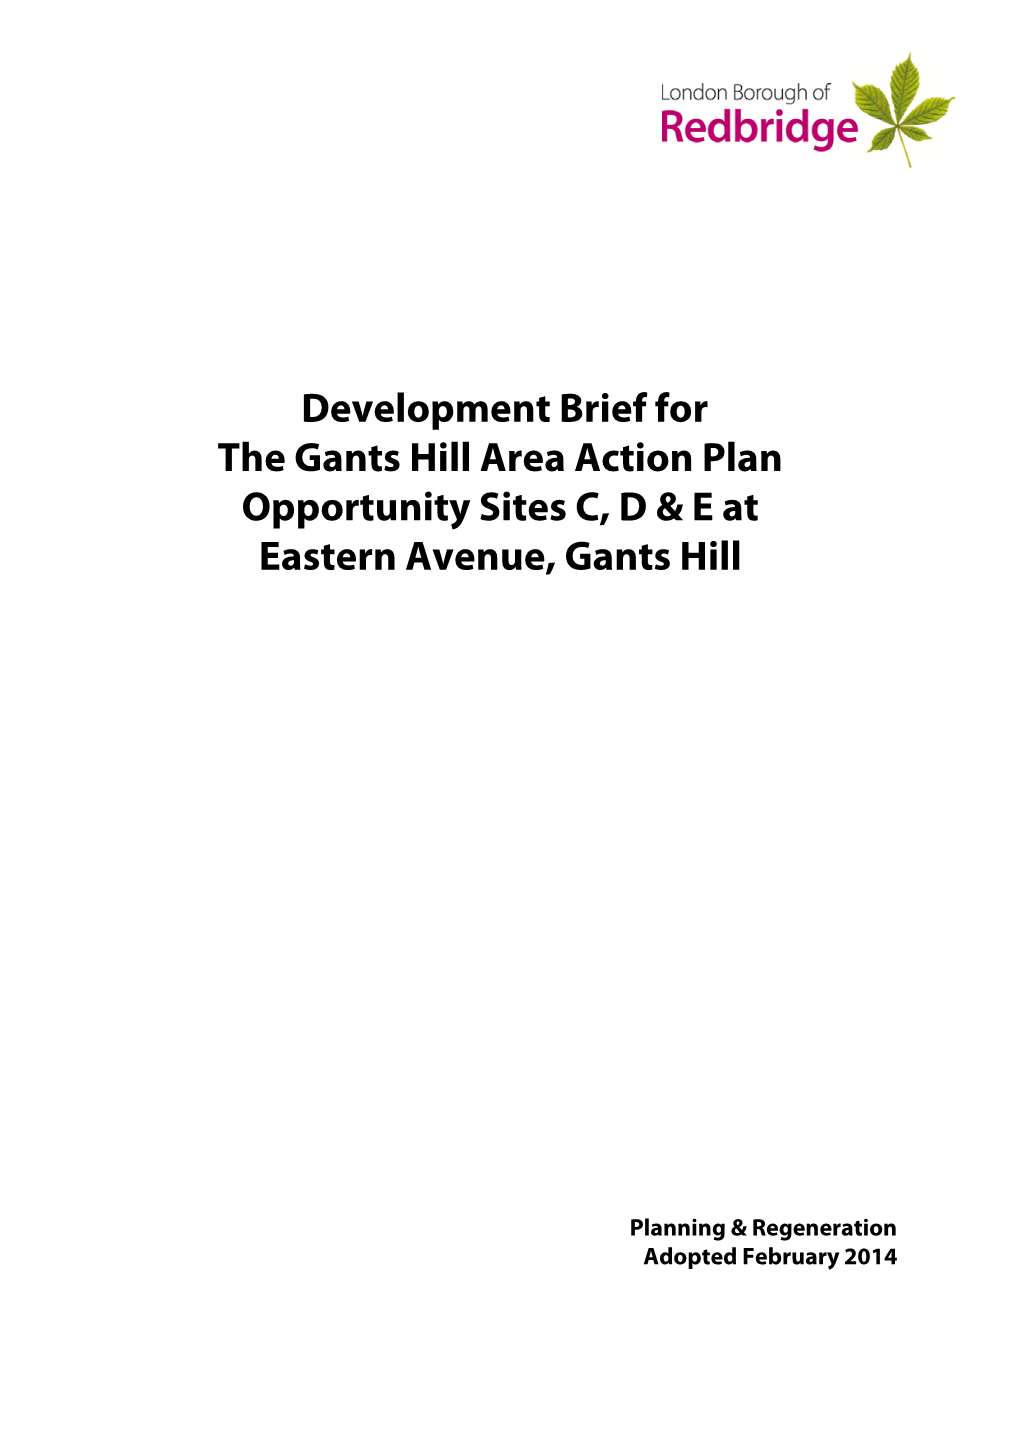 Development Brief for the Gants Hill Area Action Plan Opportunity Sites C, D & E at Eastern Avenue, Gants Hill